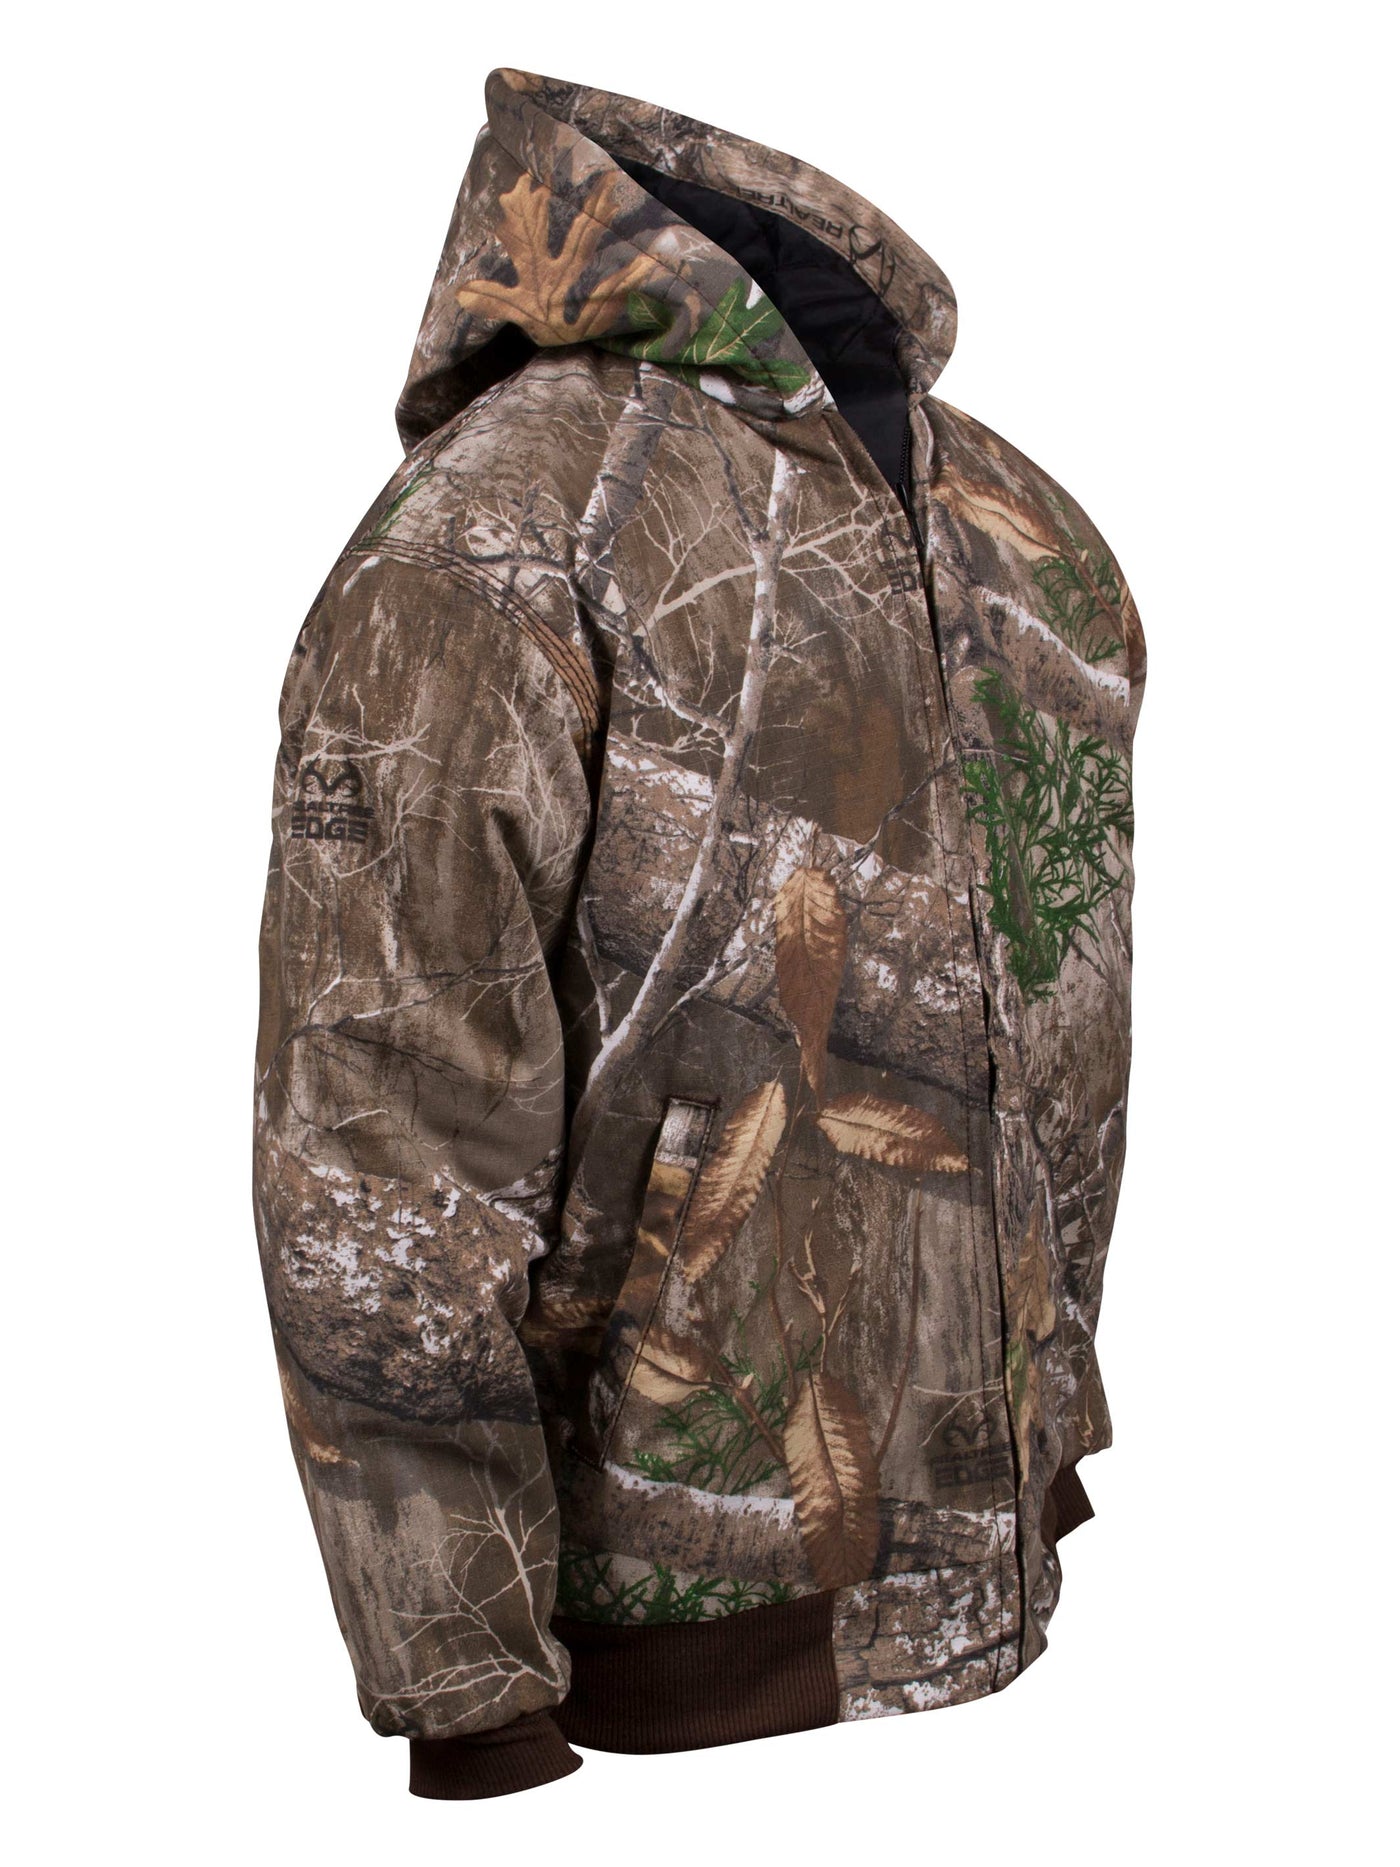 Kids Classic Insulated Jacket in Realtree Edge| Corbotras lochi